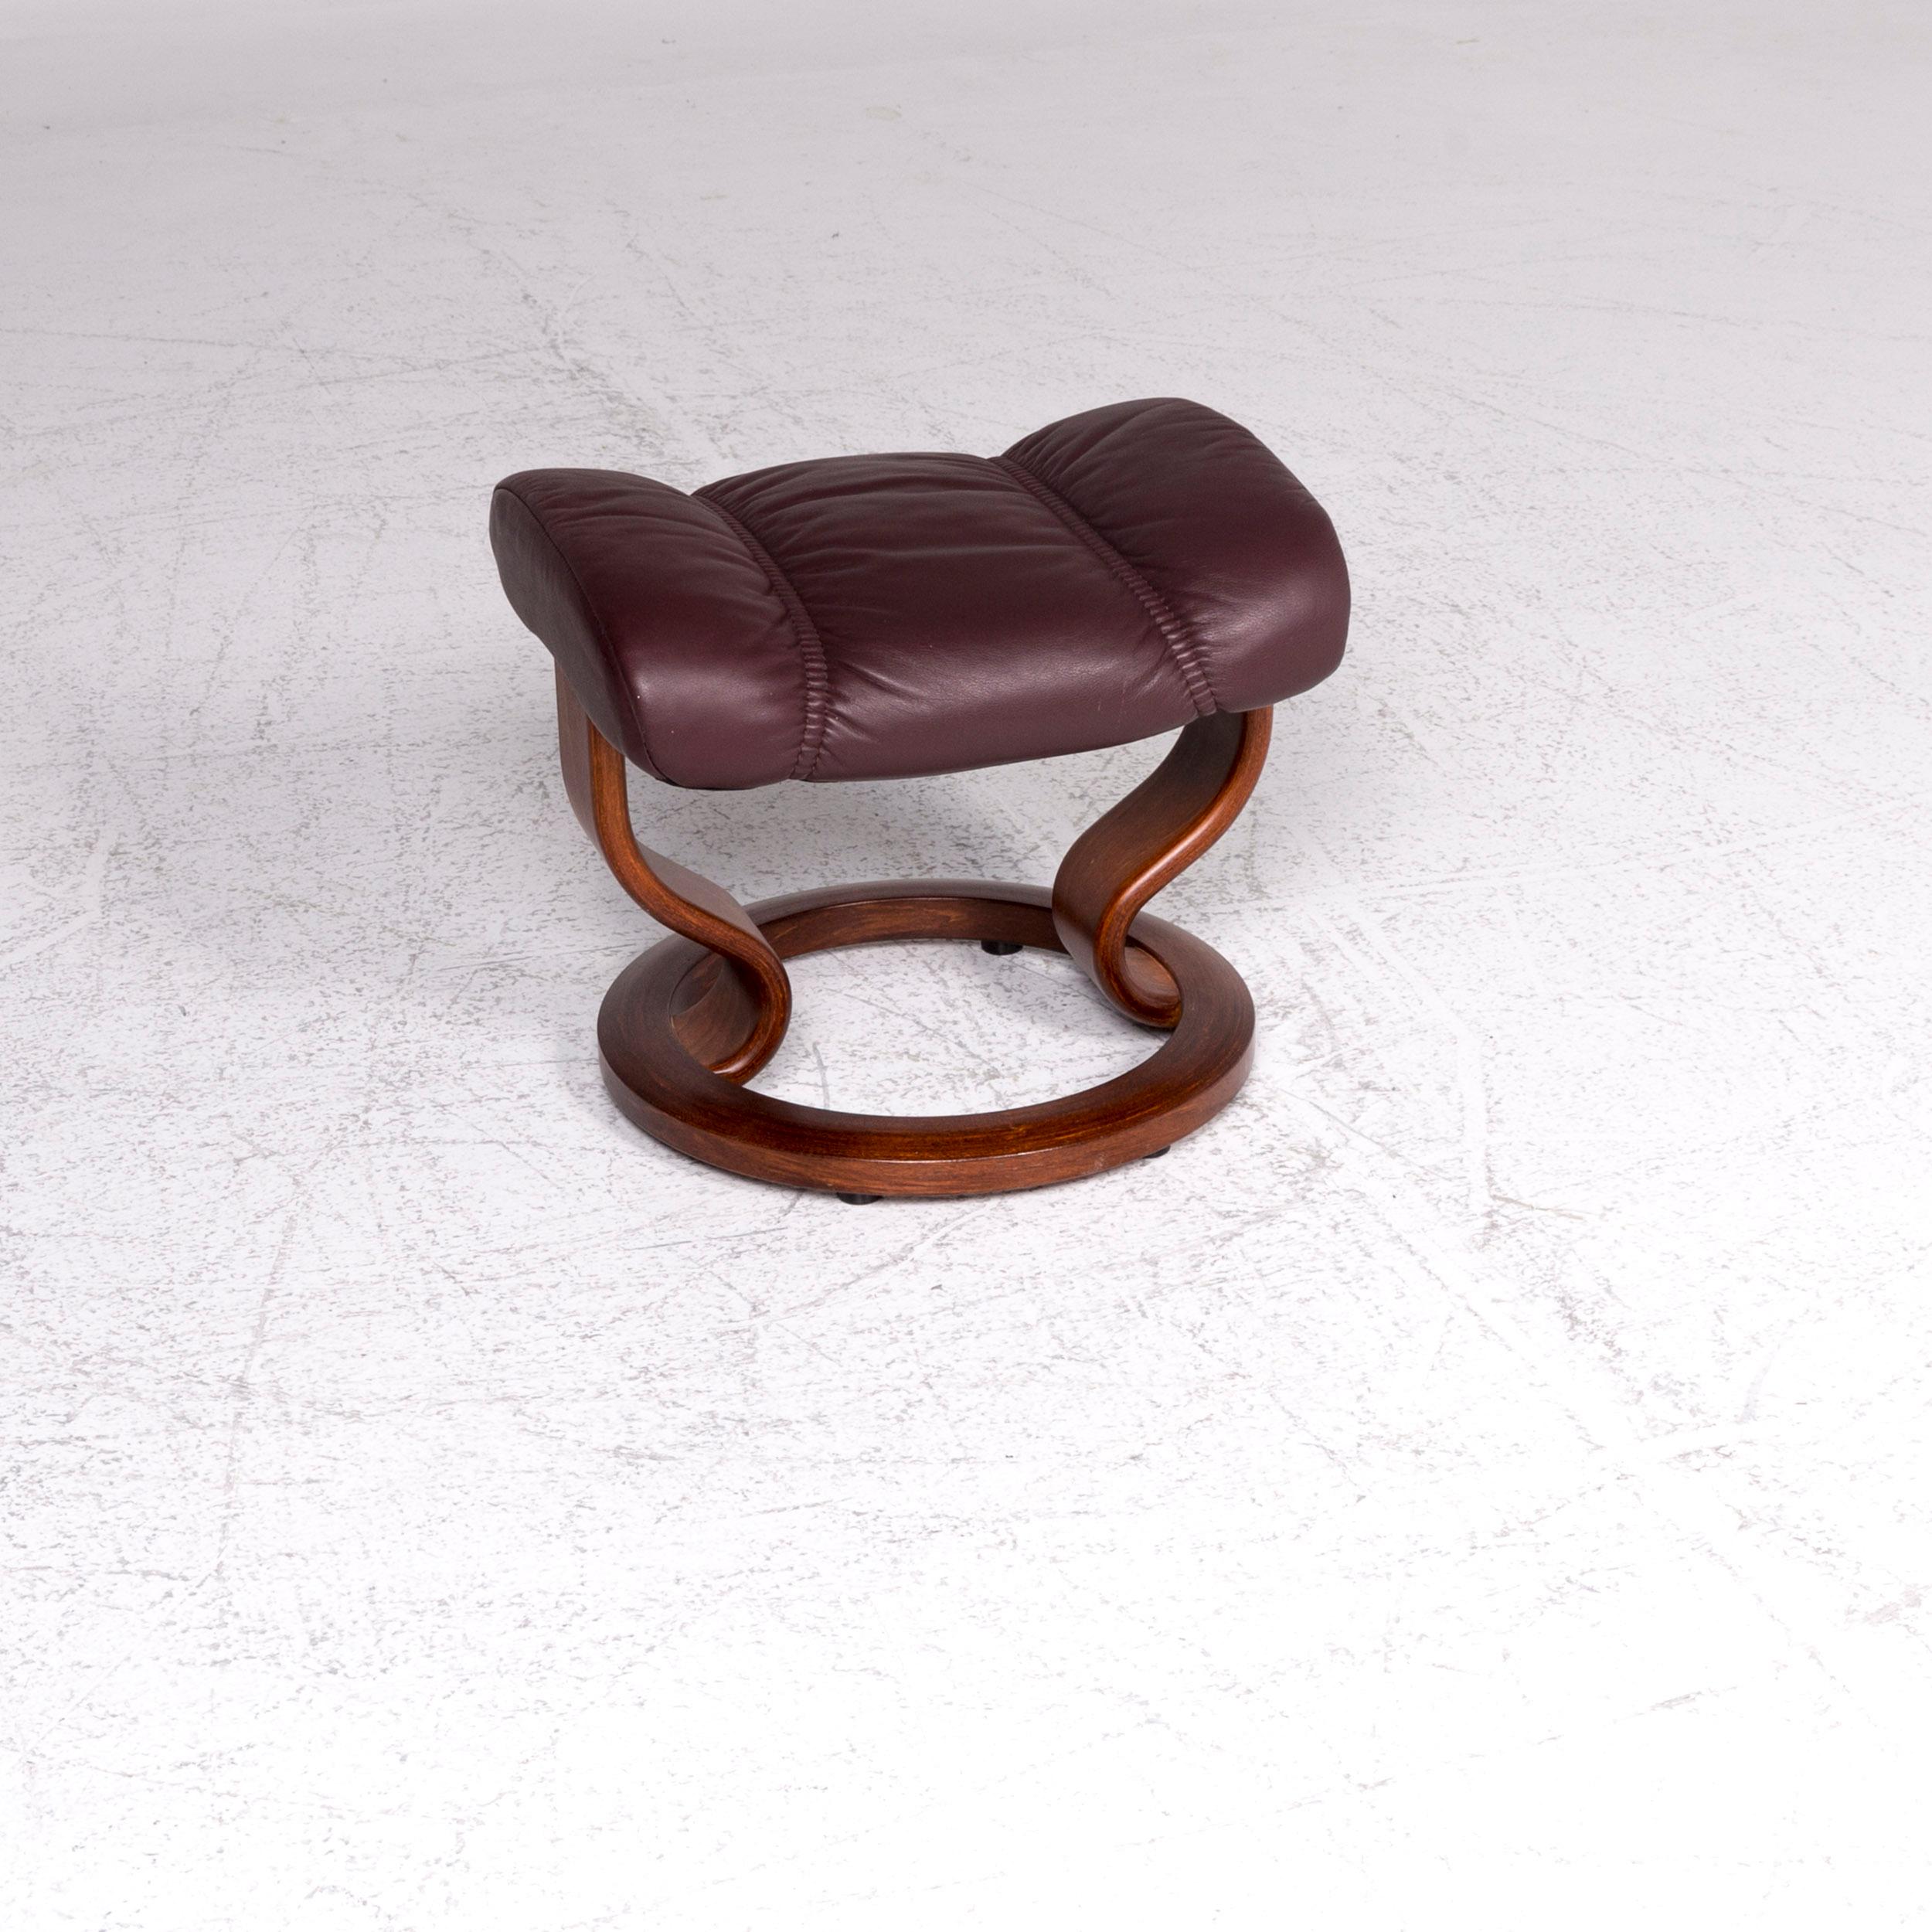 Norwegian Stressless Consul Leather Armchair Stool Red-Brown Relax Function